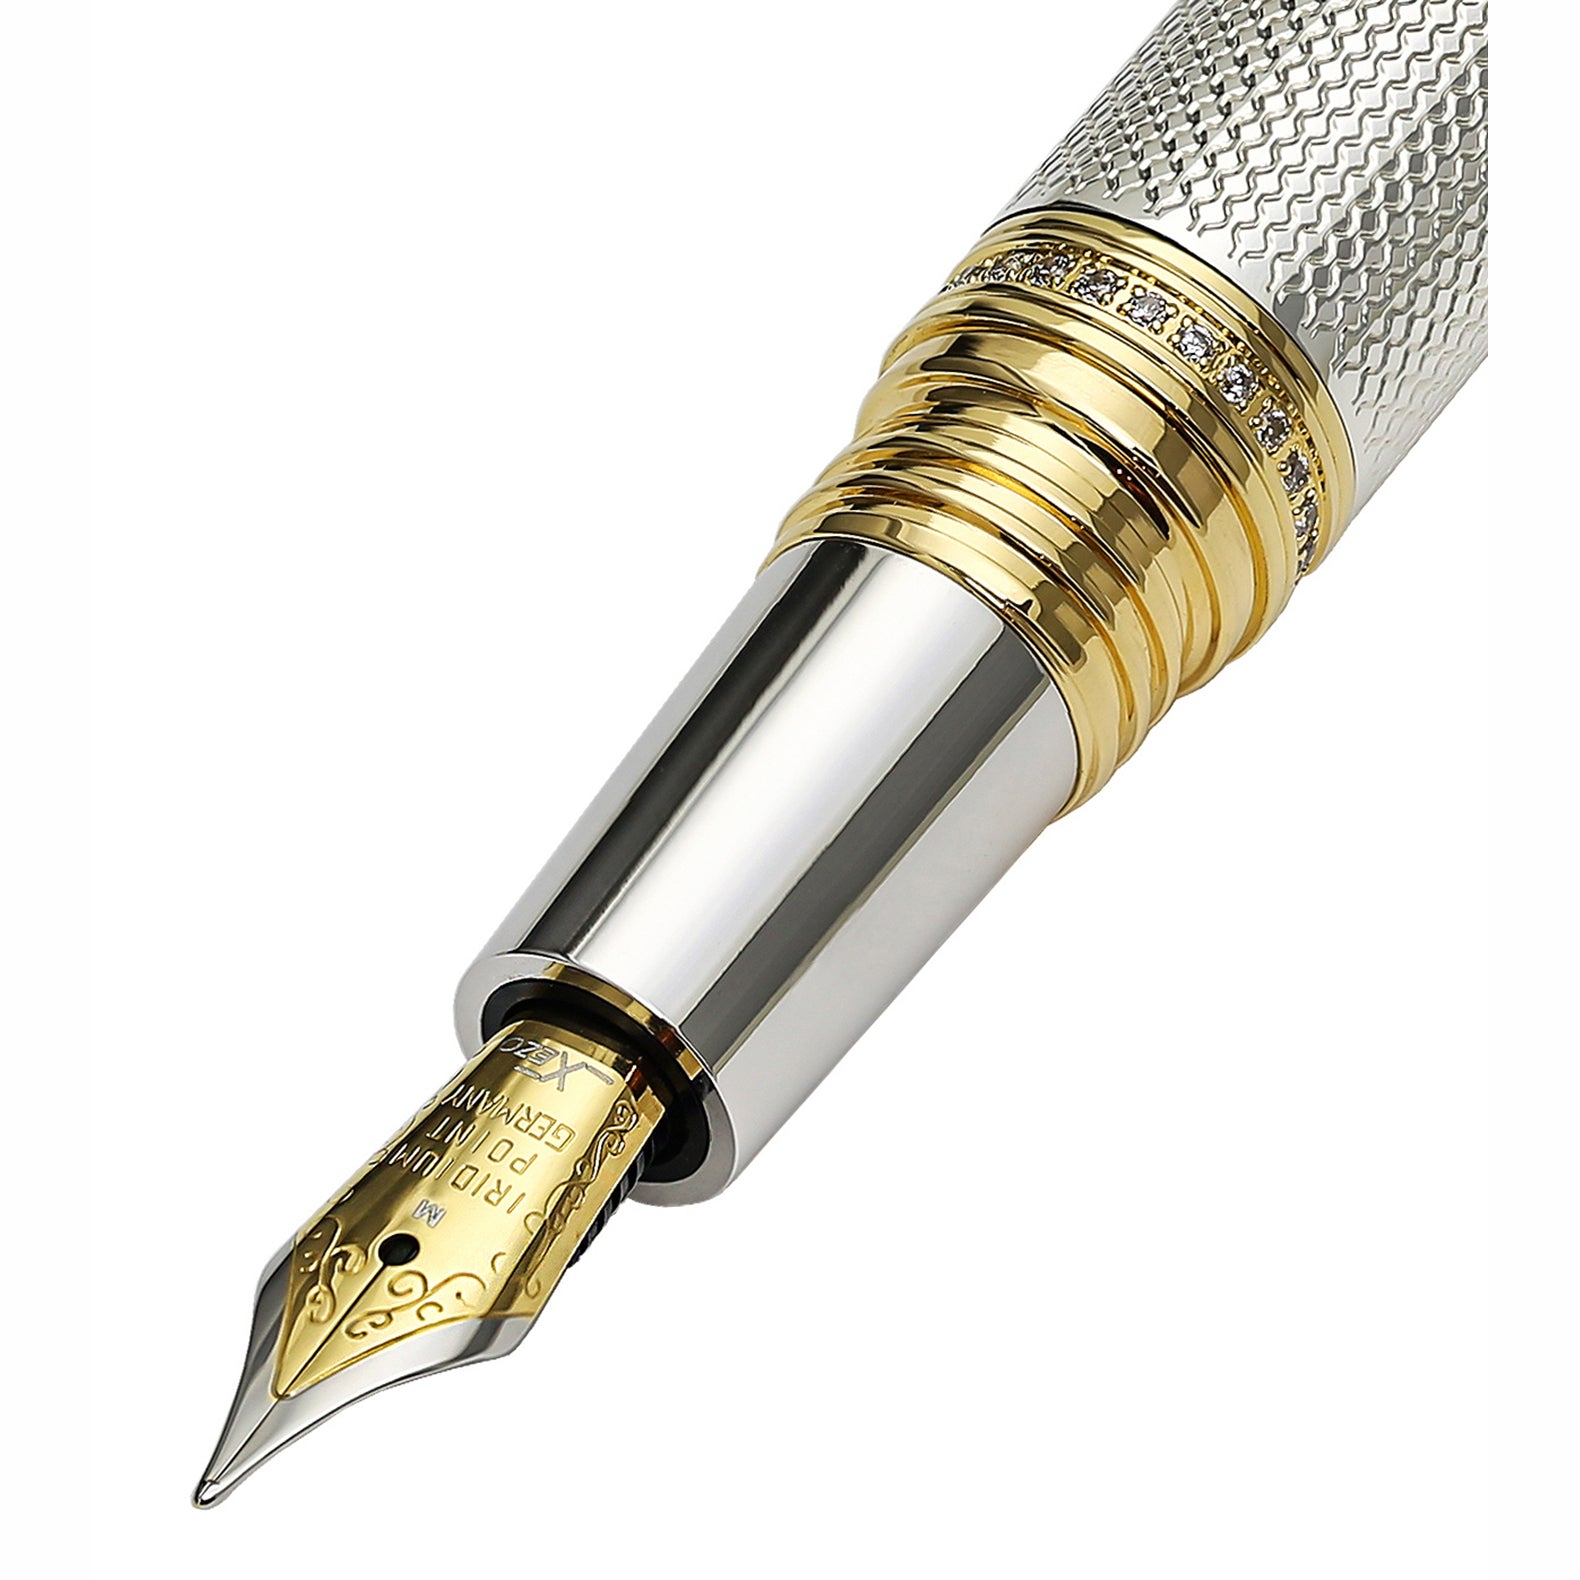 Xezo - Close-up view of the section and nib of the Maestro 925 Sterling Silver F-2 fountain pen